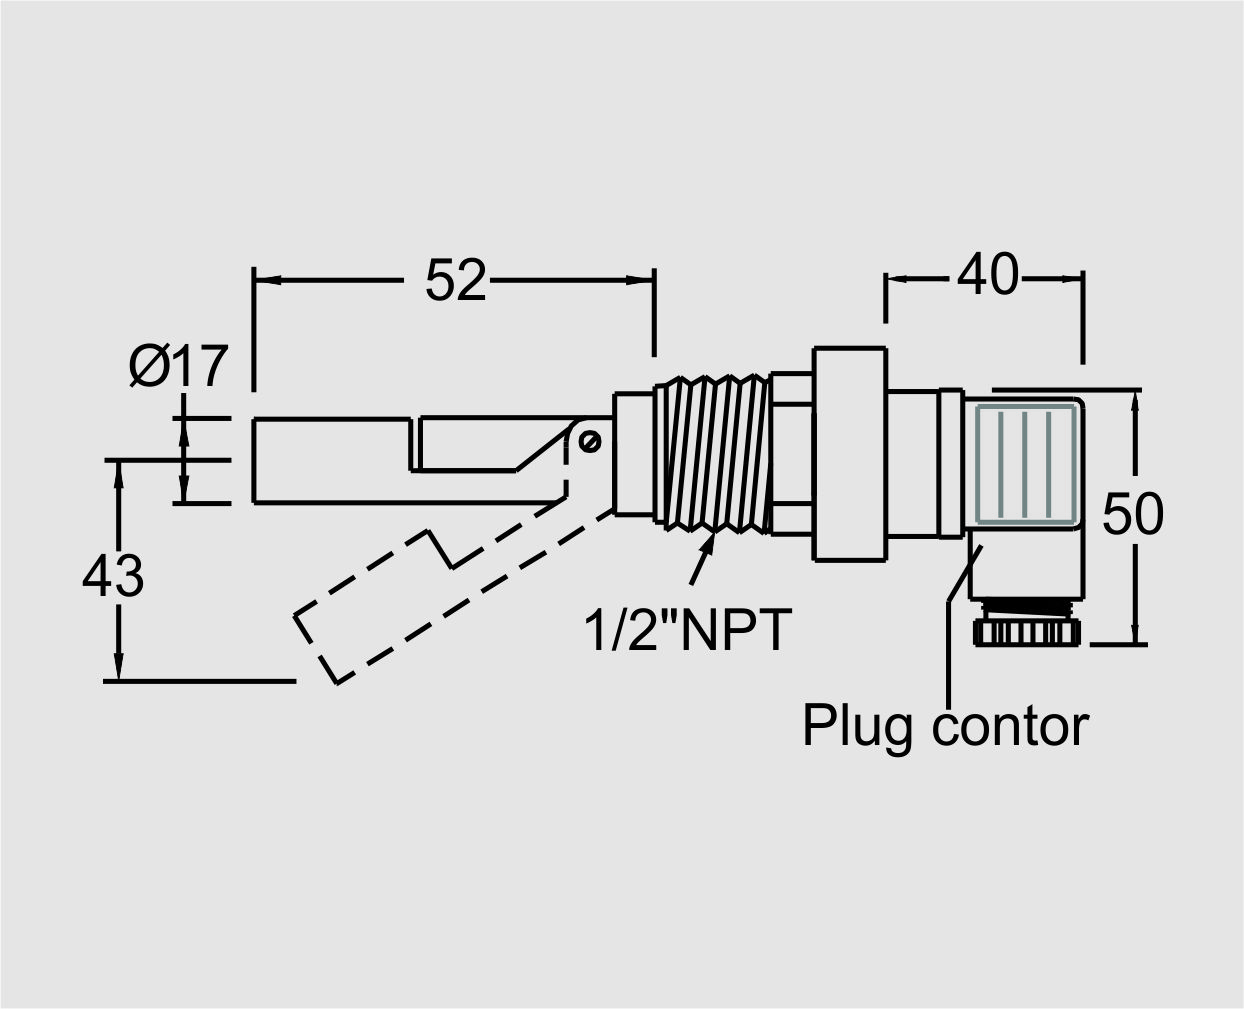  MINI FLOAT PIVOTED LEVEL SWITCHES FOR LIQUIDS – MFPS